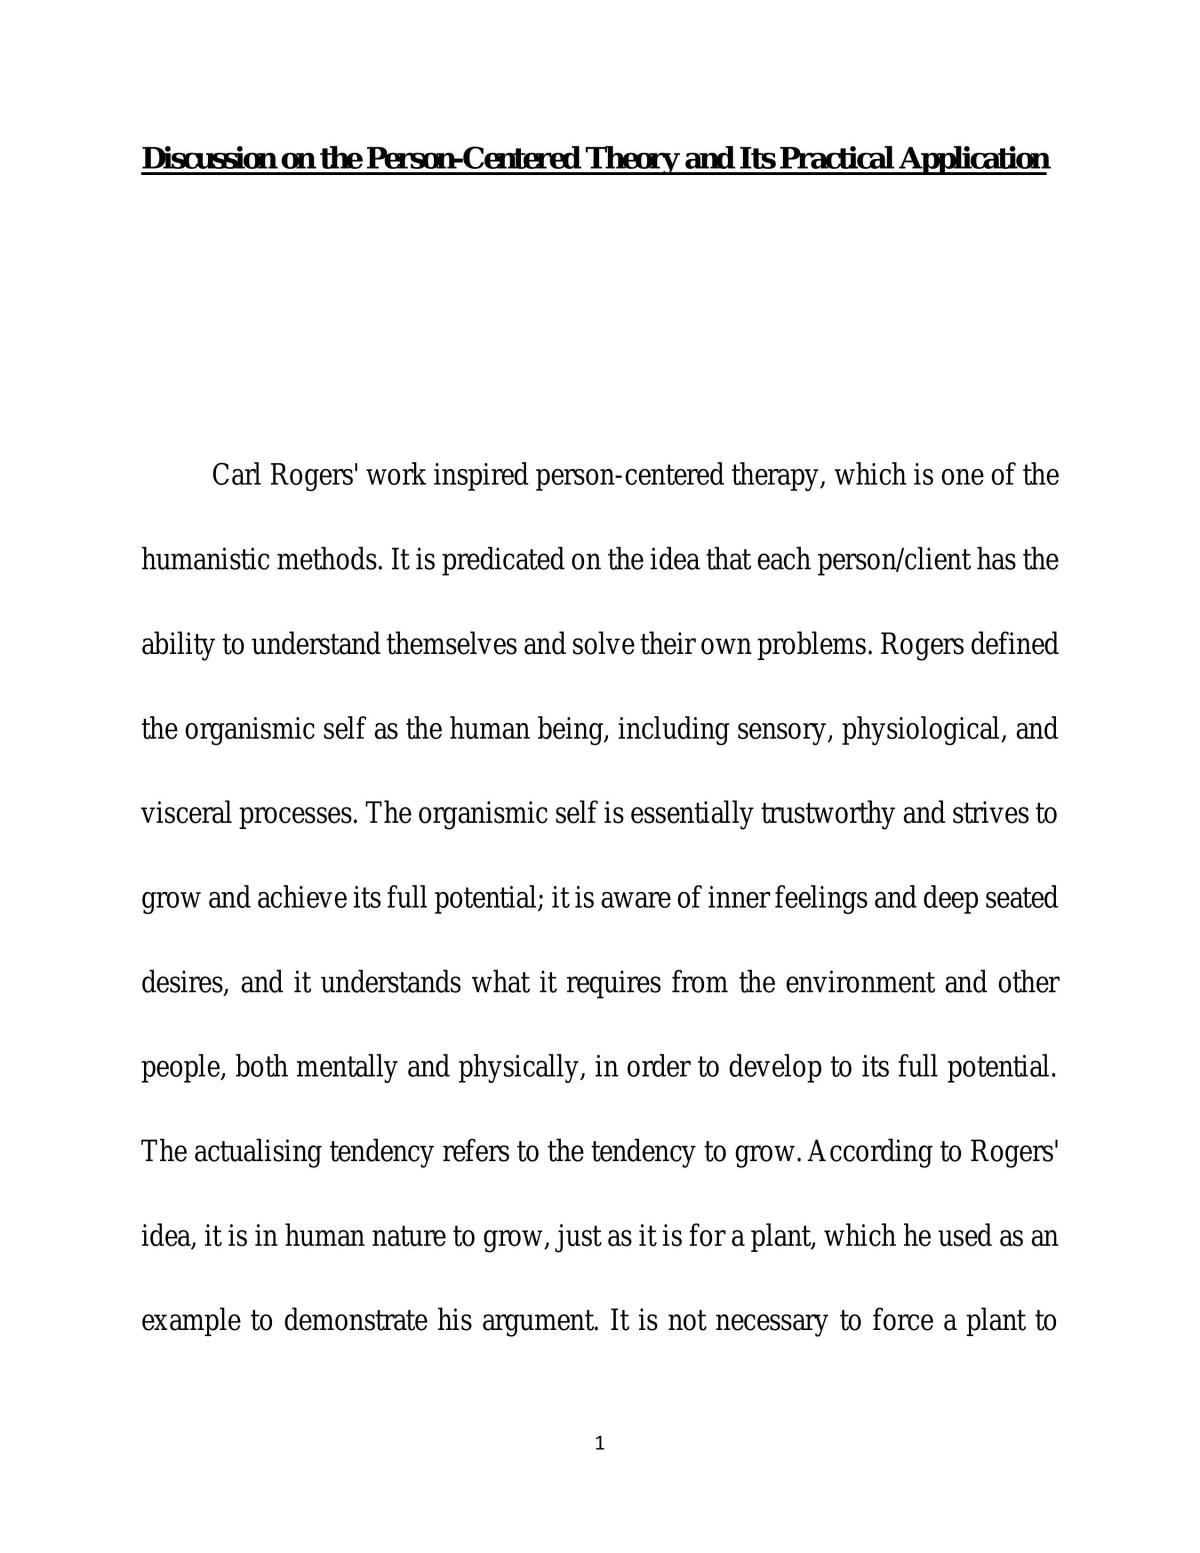 Person centered theory  - Page 1